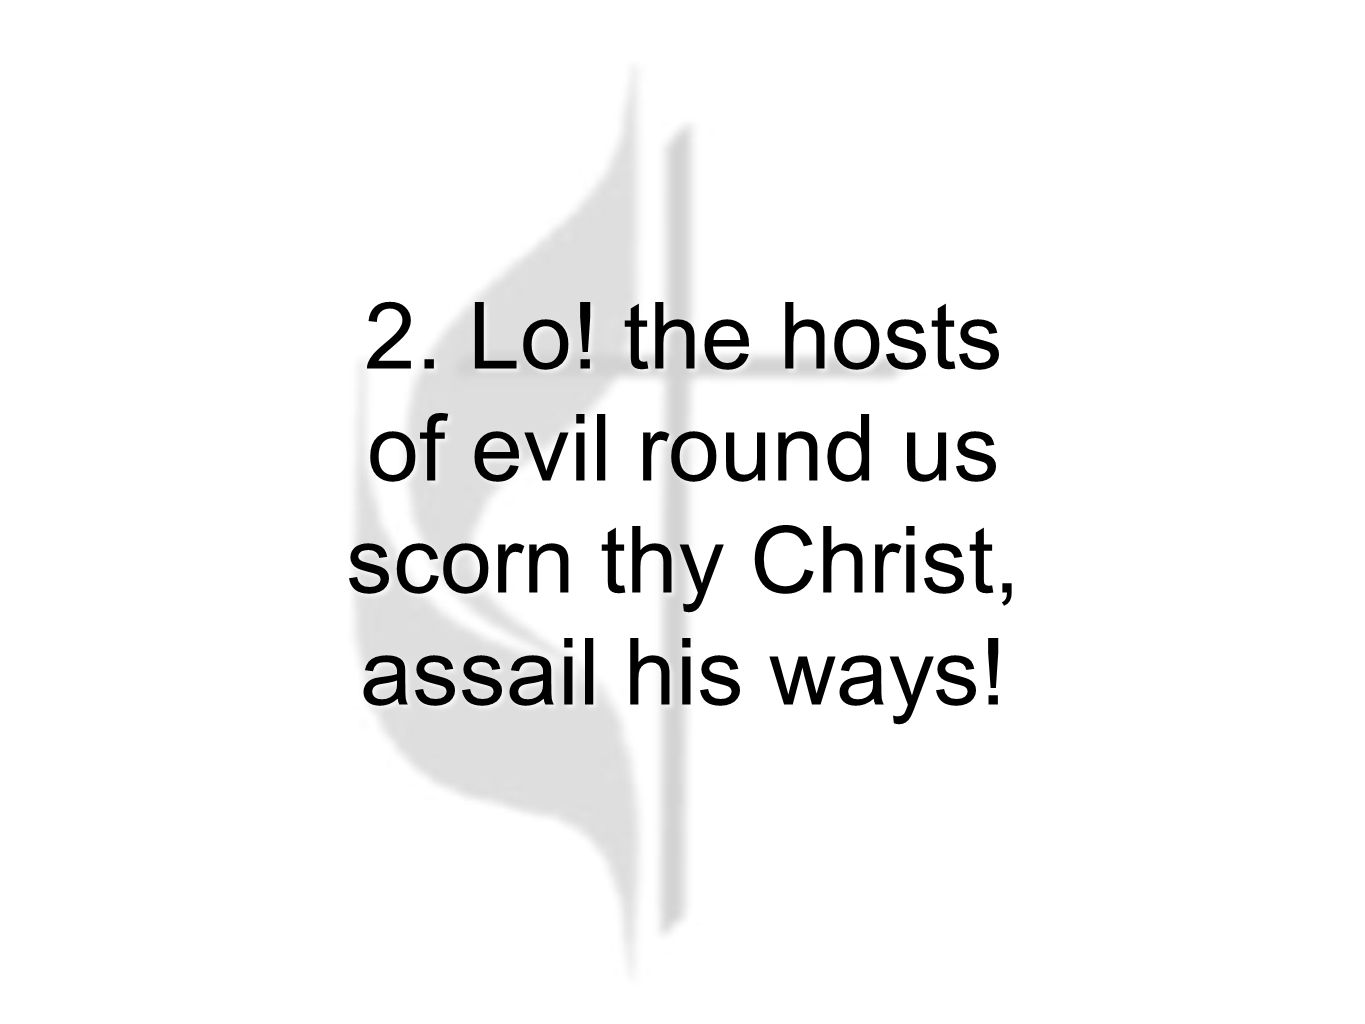 2. Lo. the hosts of evil round us scorn thy Christ, assail his ways.